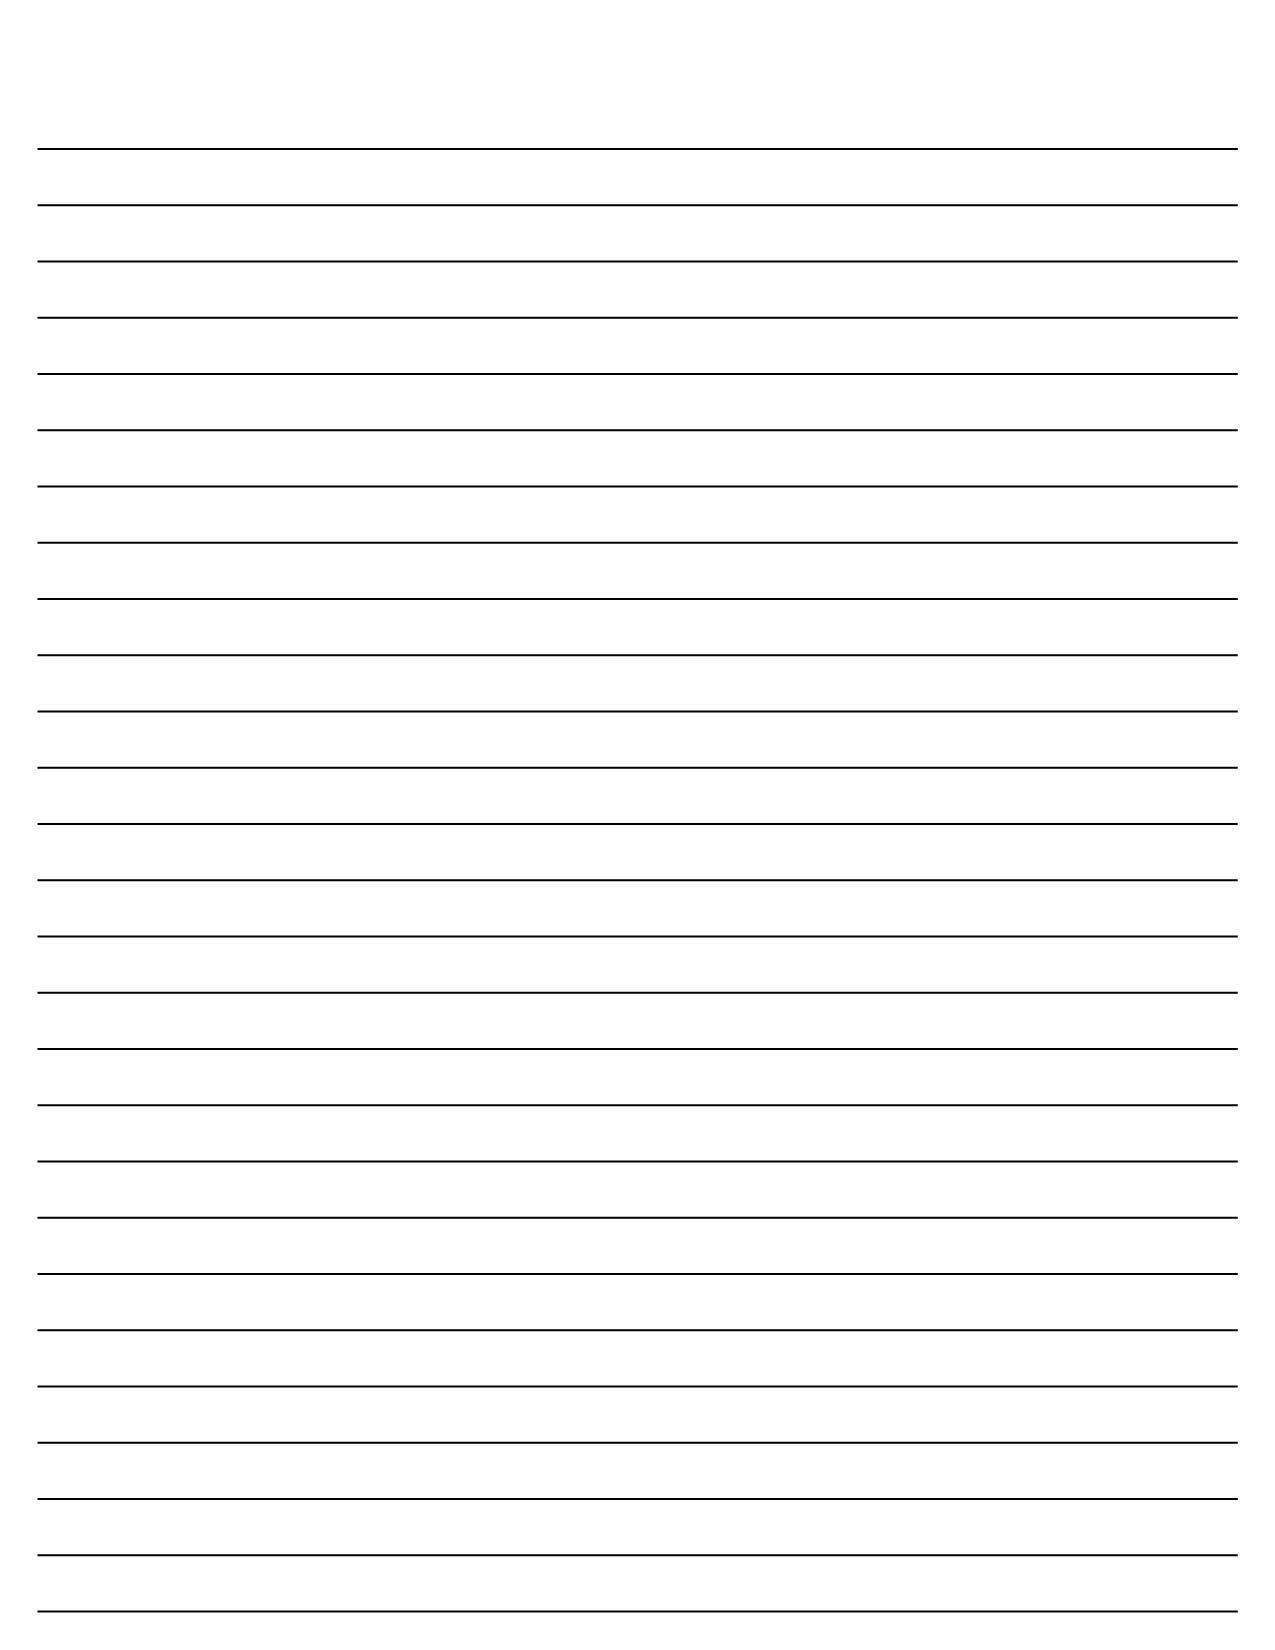 Print Free Lined Paper